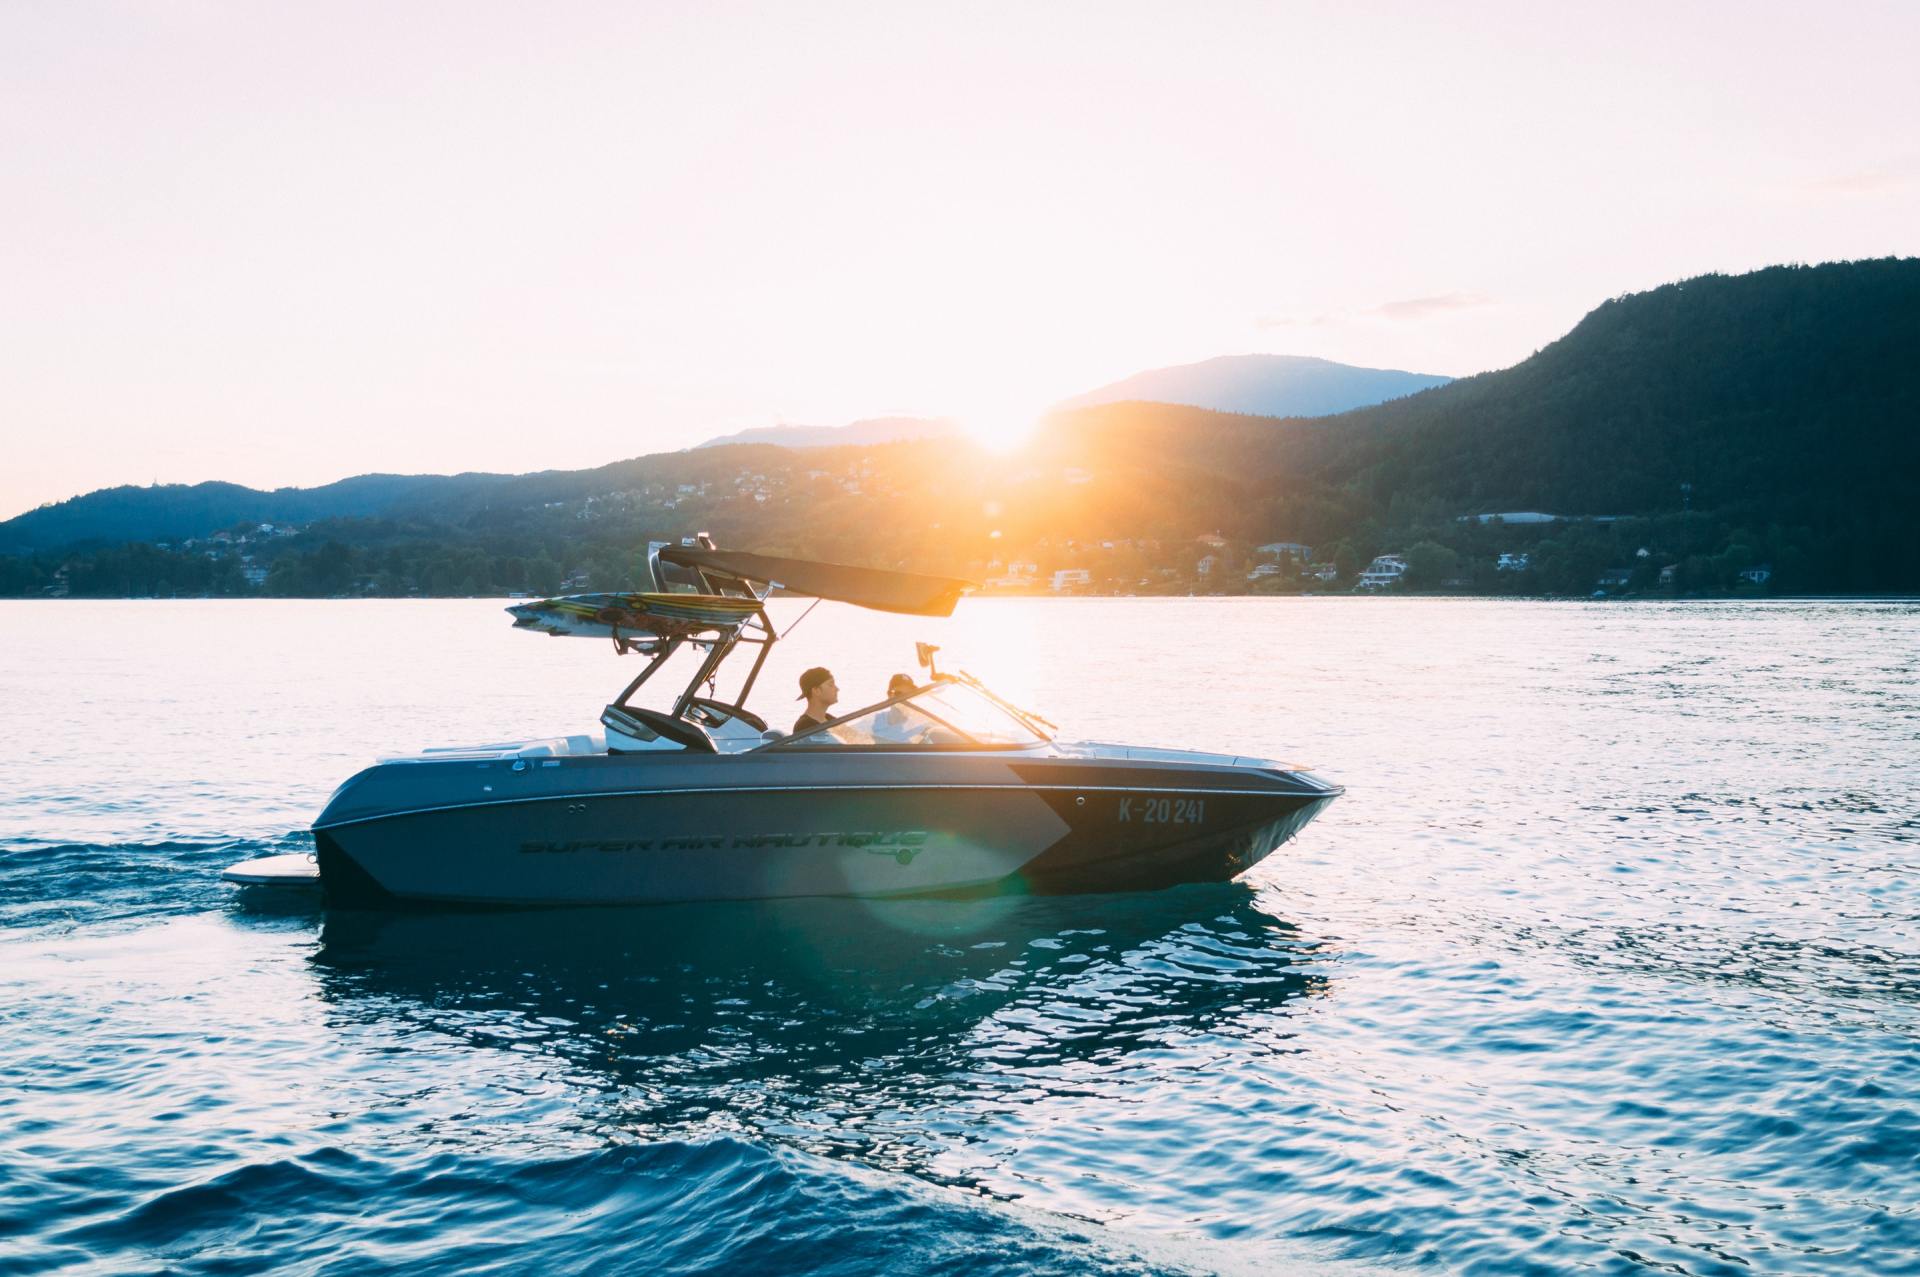 Boat Safety Equipment Checklist: What You Need to Have - Dark